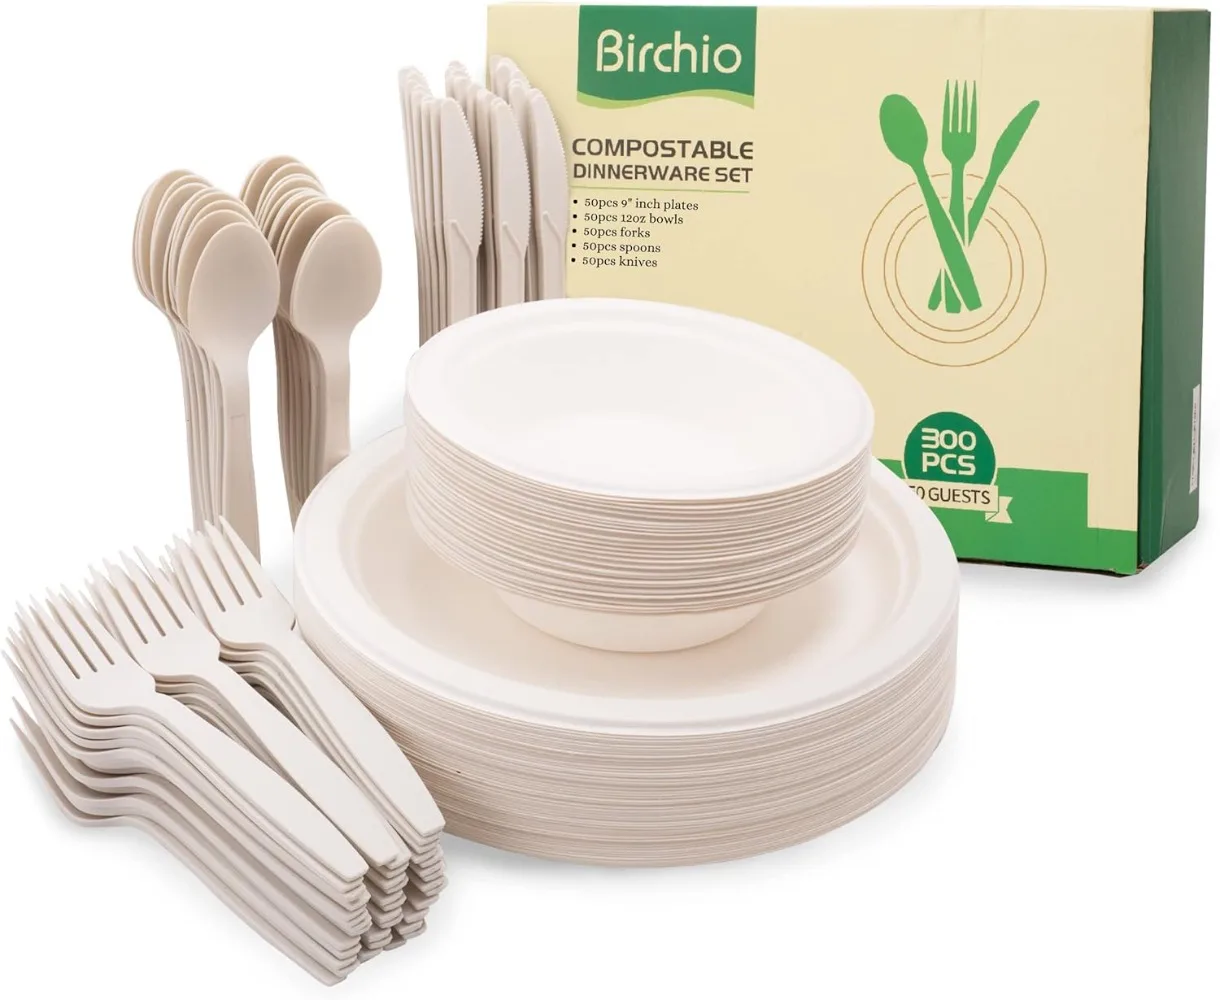 

250 Piece (50 Sets) Biodegradable Paper Plates Set (EXTRA LONG UTENSILS), Disposable Dinnerware Set, Dishes and Plates Sets